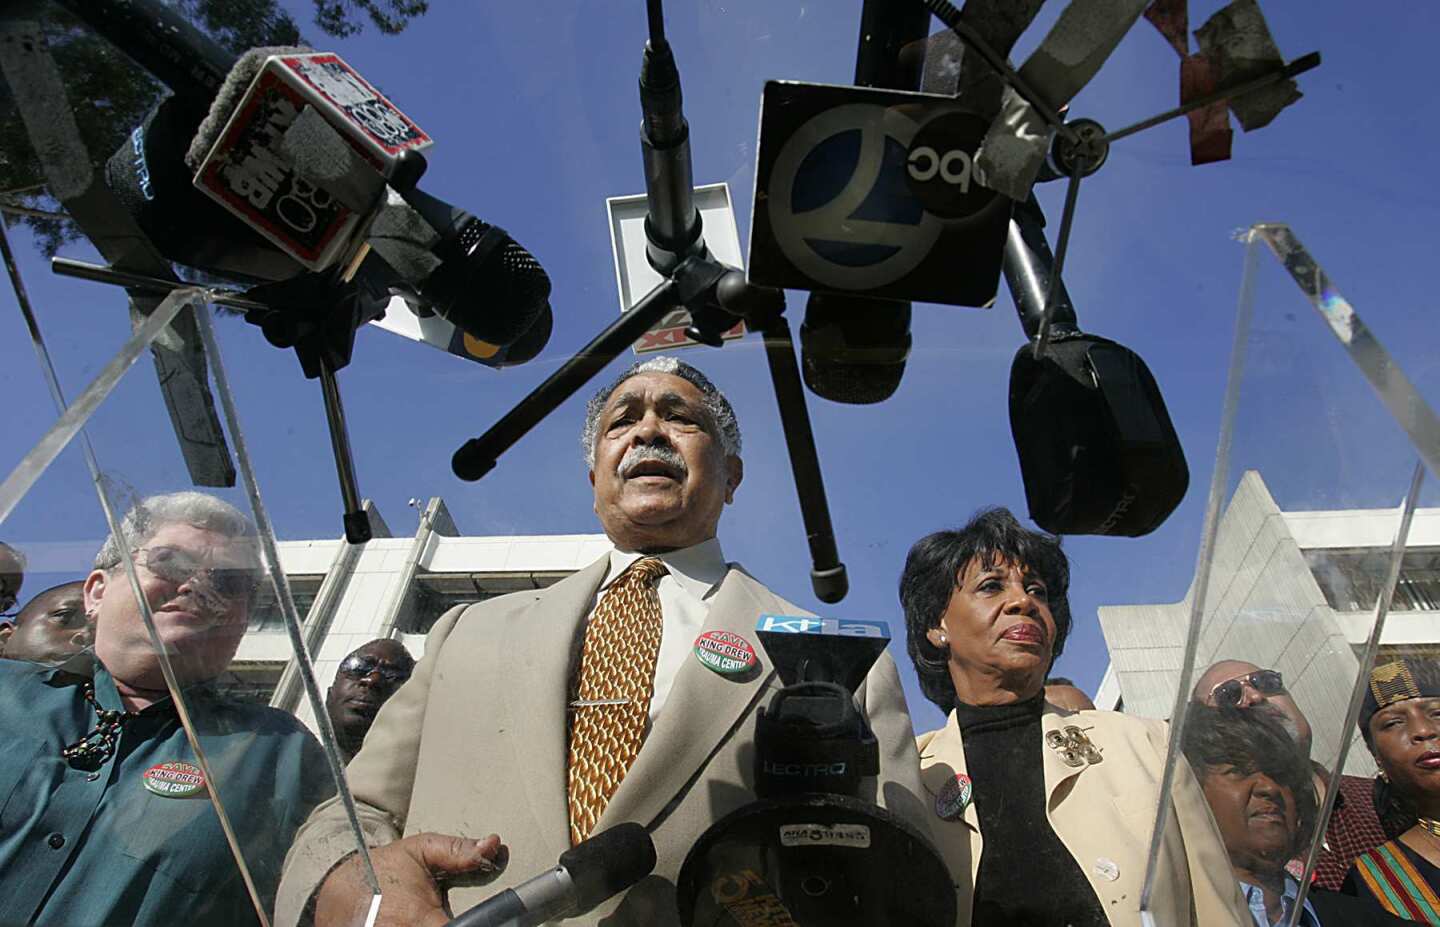 Assemblyman Mervyn Dymally (D-Compton) and Rep. Maxine Waters (D-Los Angeles) stand together in a news conference in 2004.